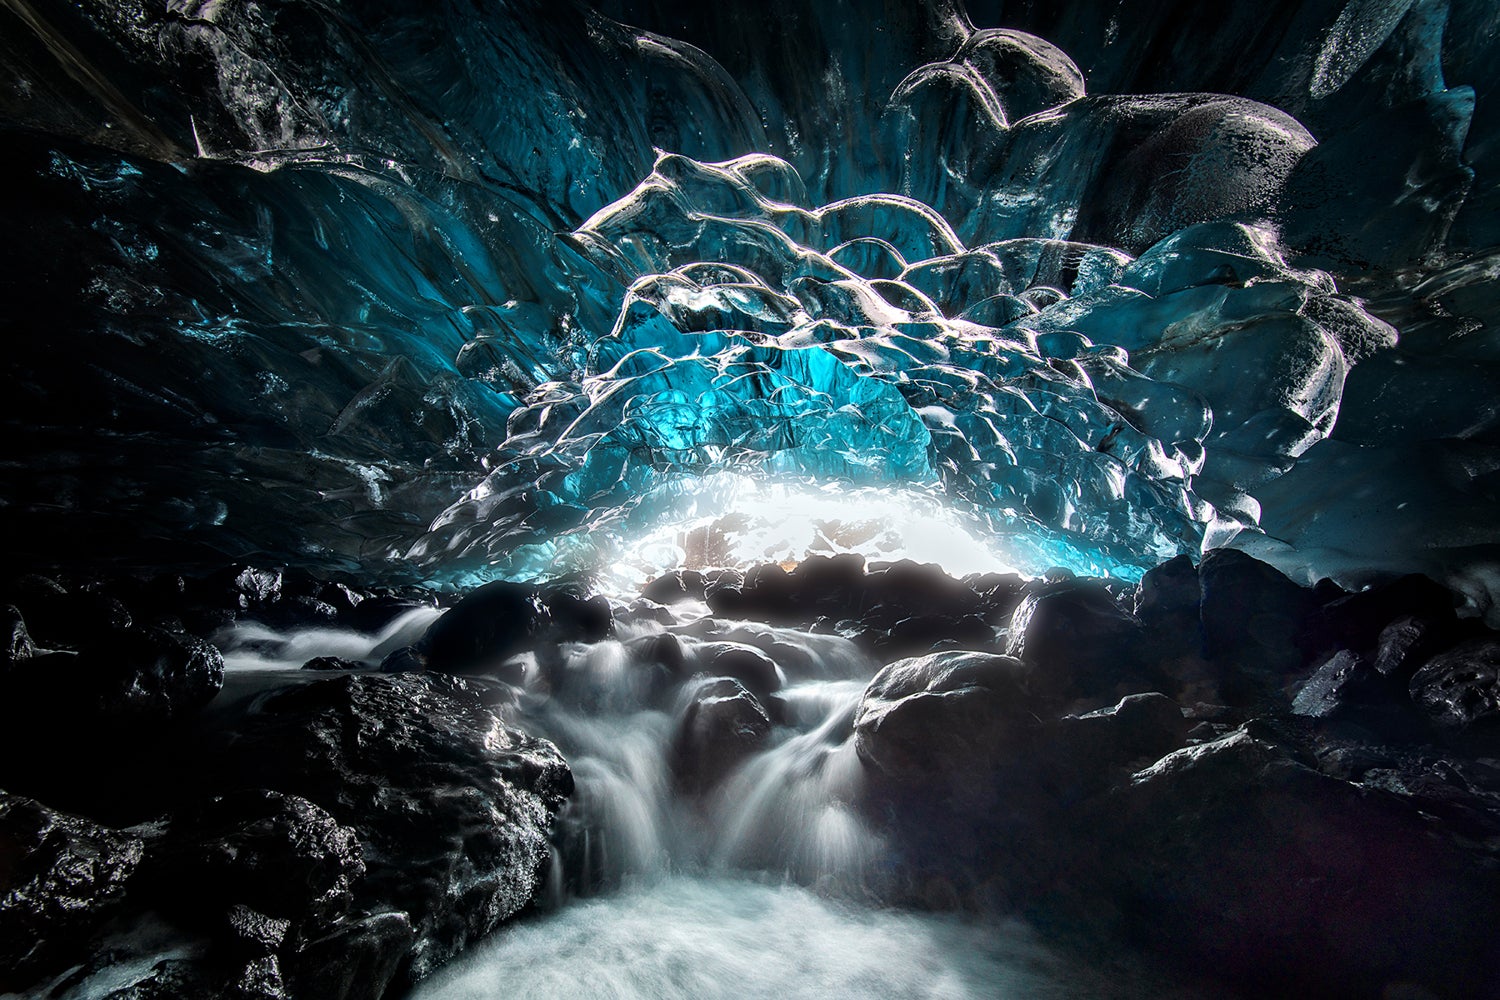 Wall Mural Photo Wallpaper | Glacier Blue Cave Order now